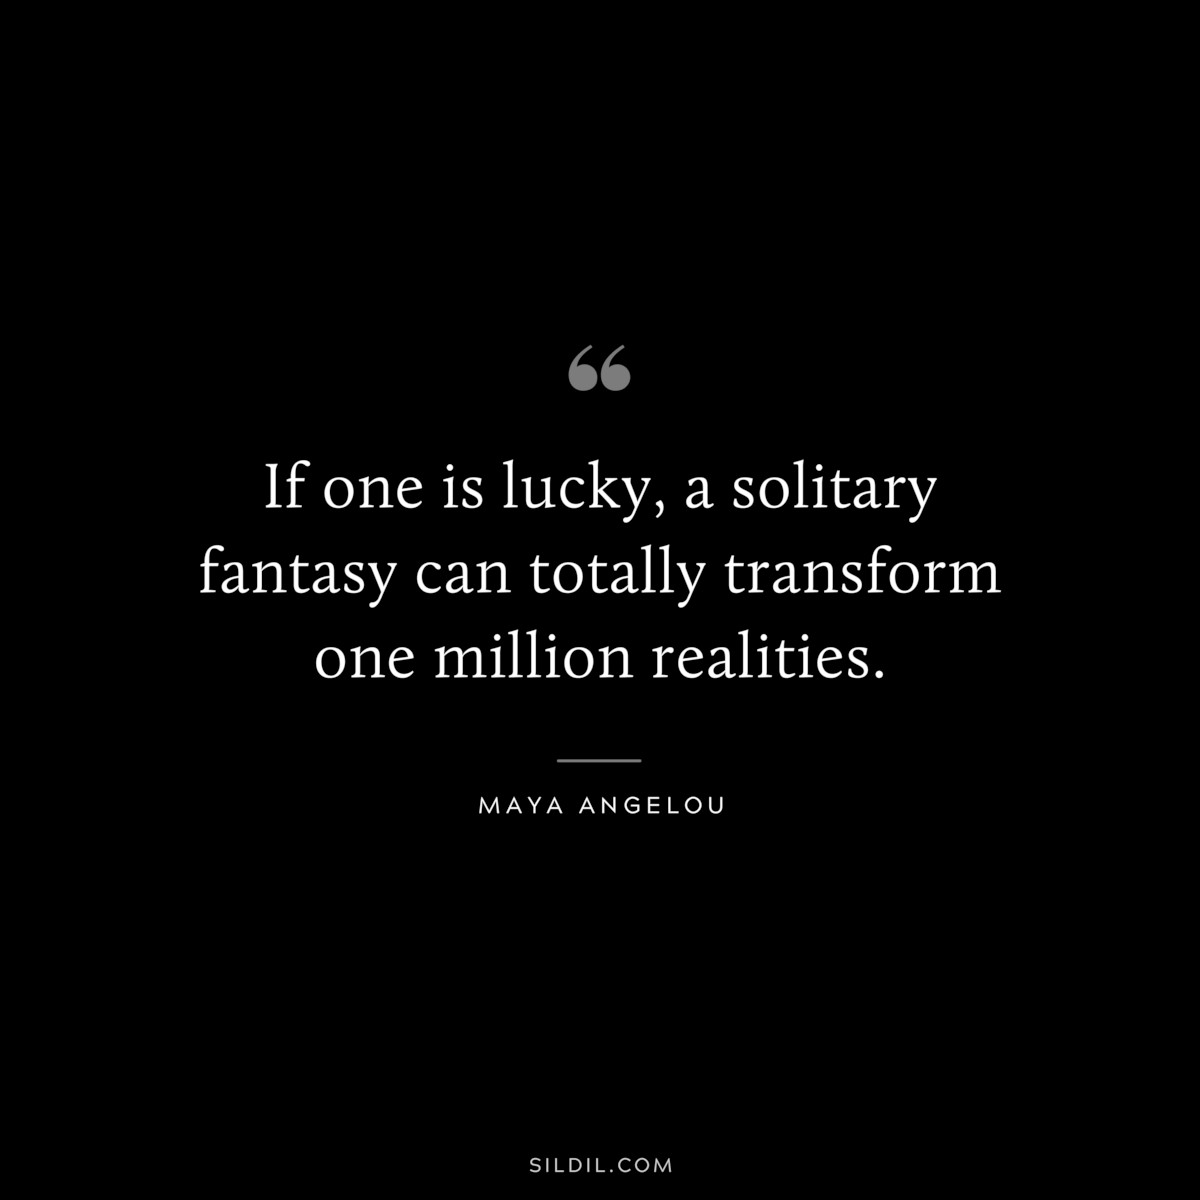 If one is lucky, a solitary fantasy can totally transform one million realities. ― Maya Angelou